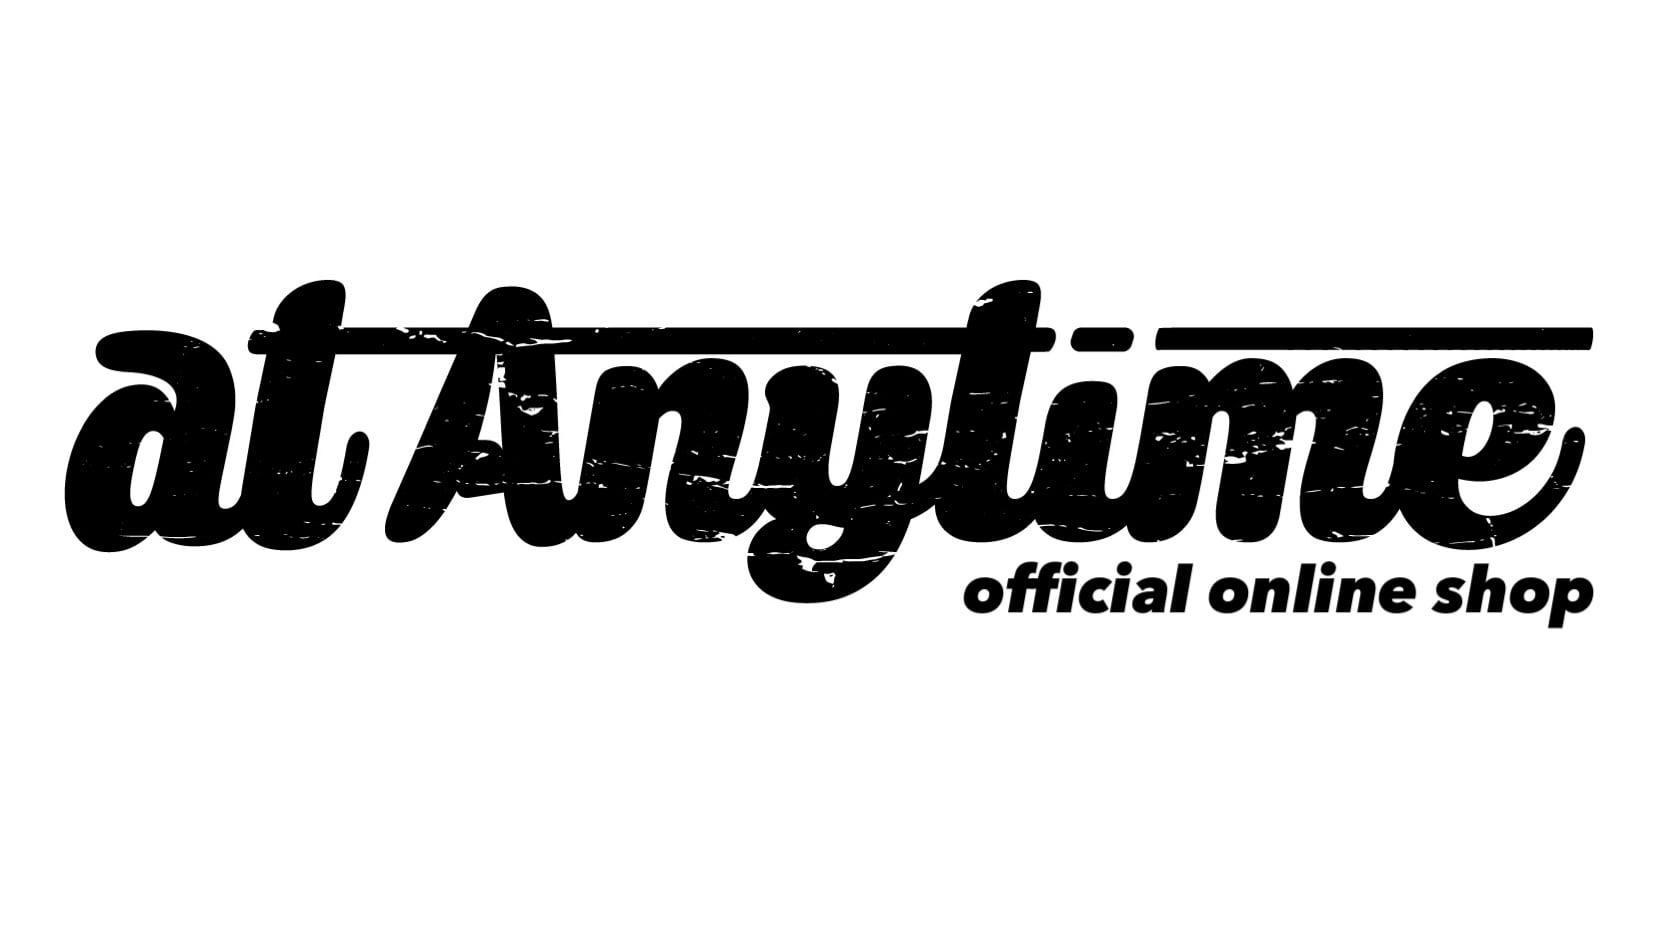 at Anytime official online shop